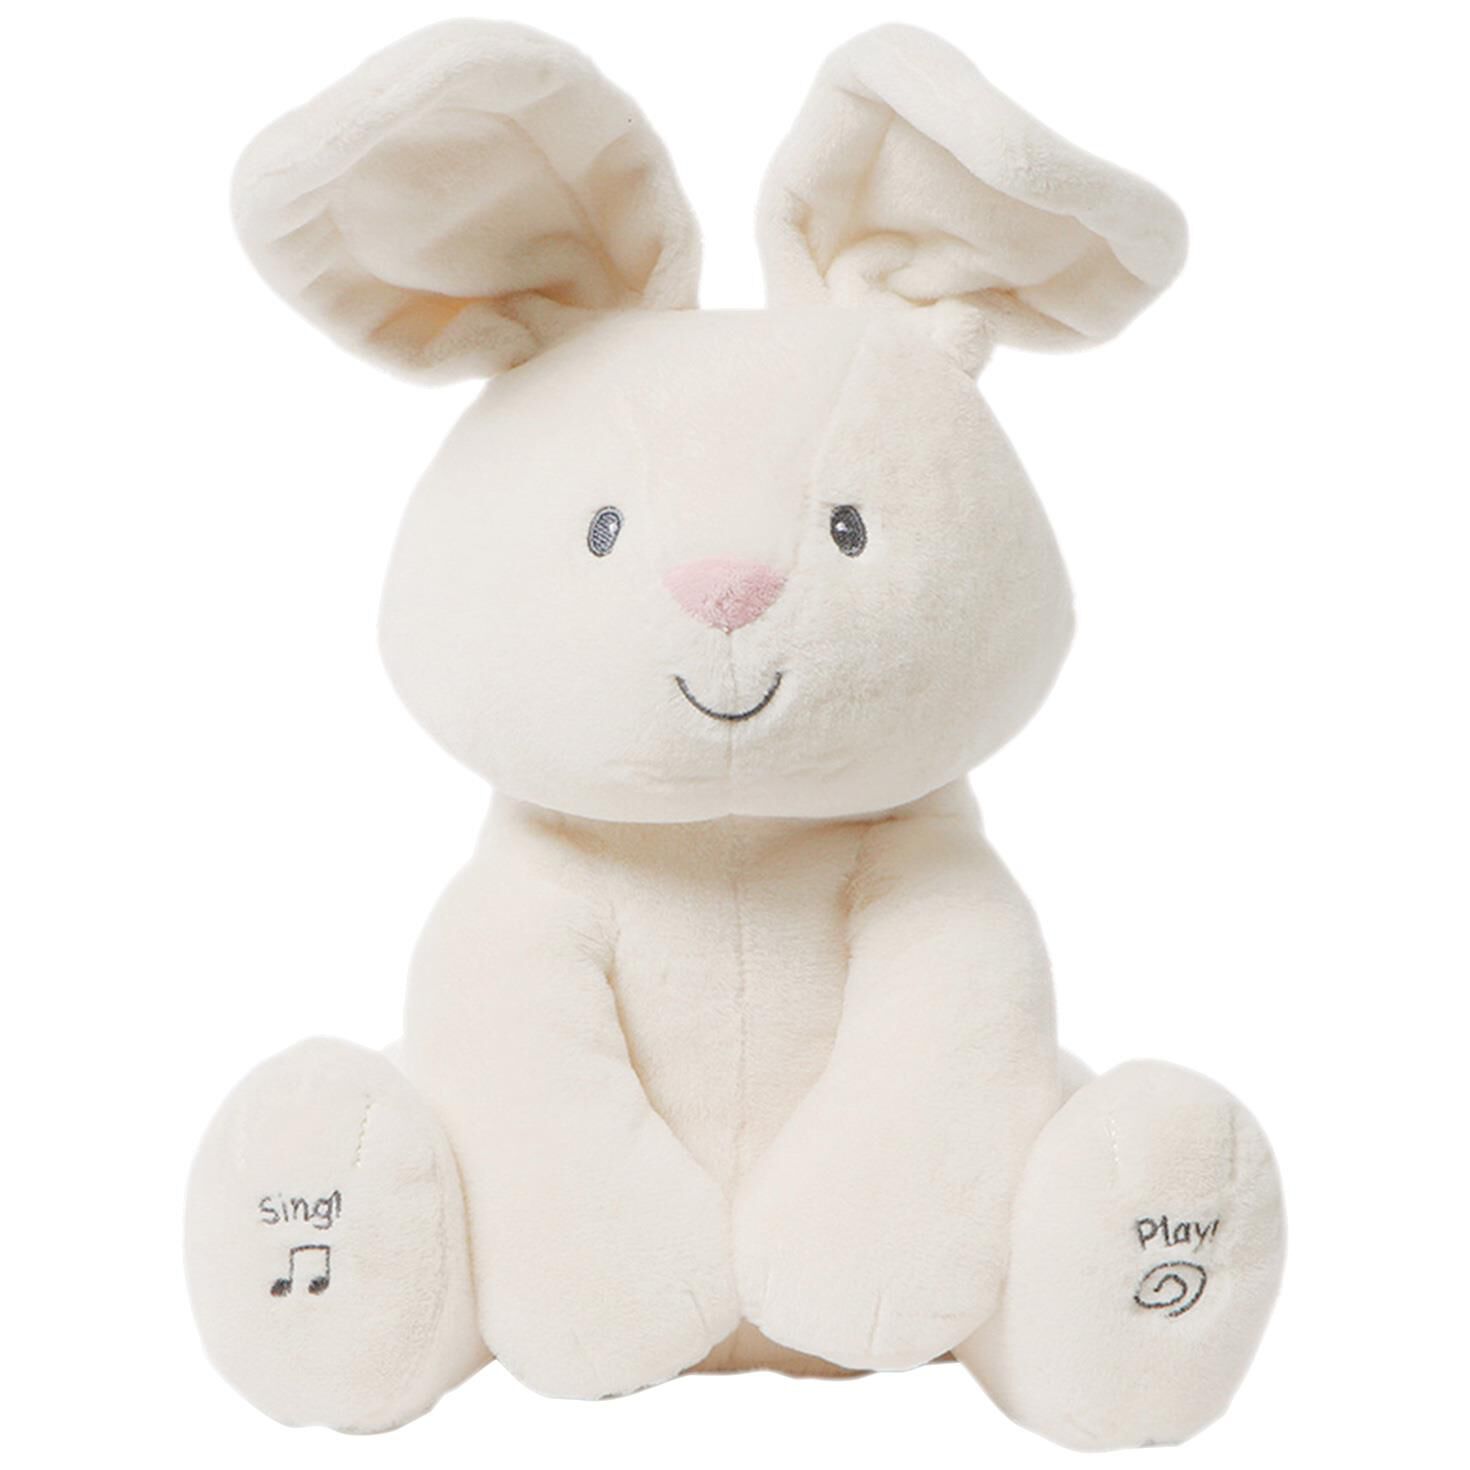 musical stuffed animals for baby